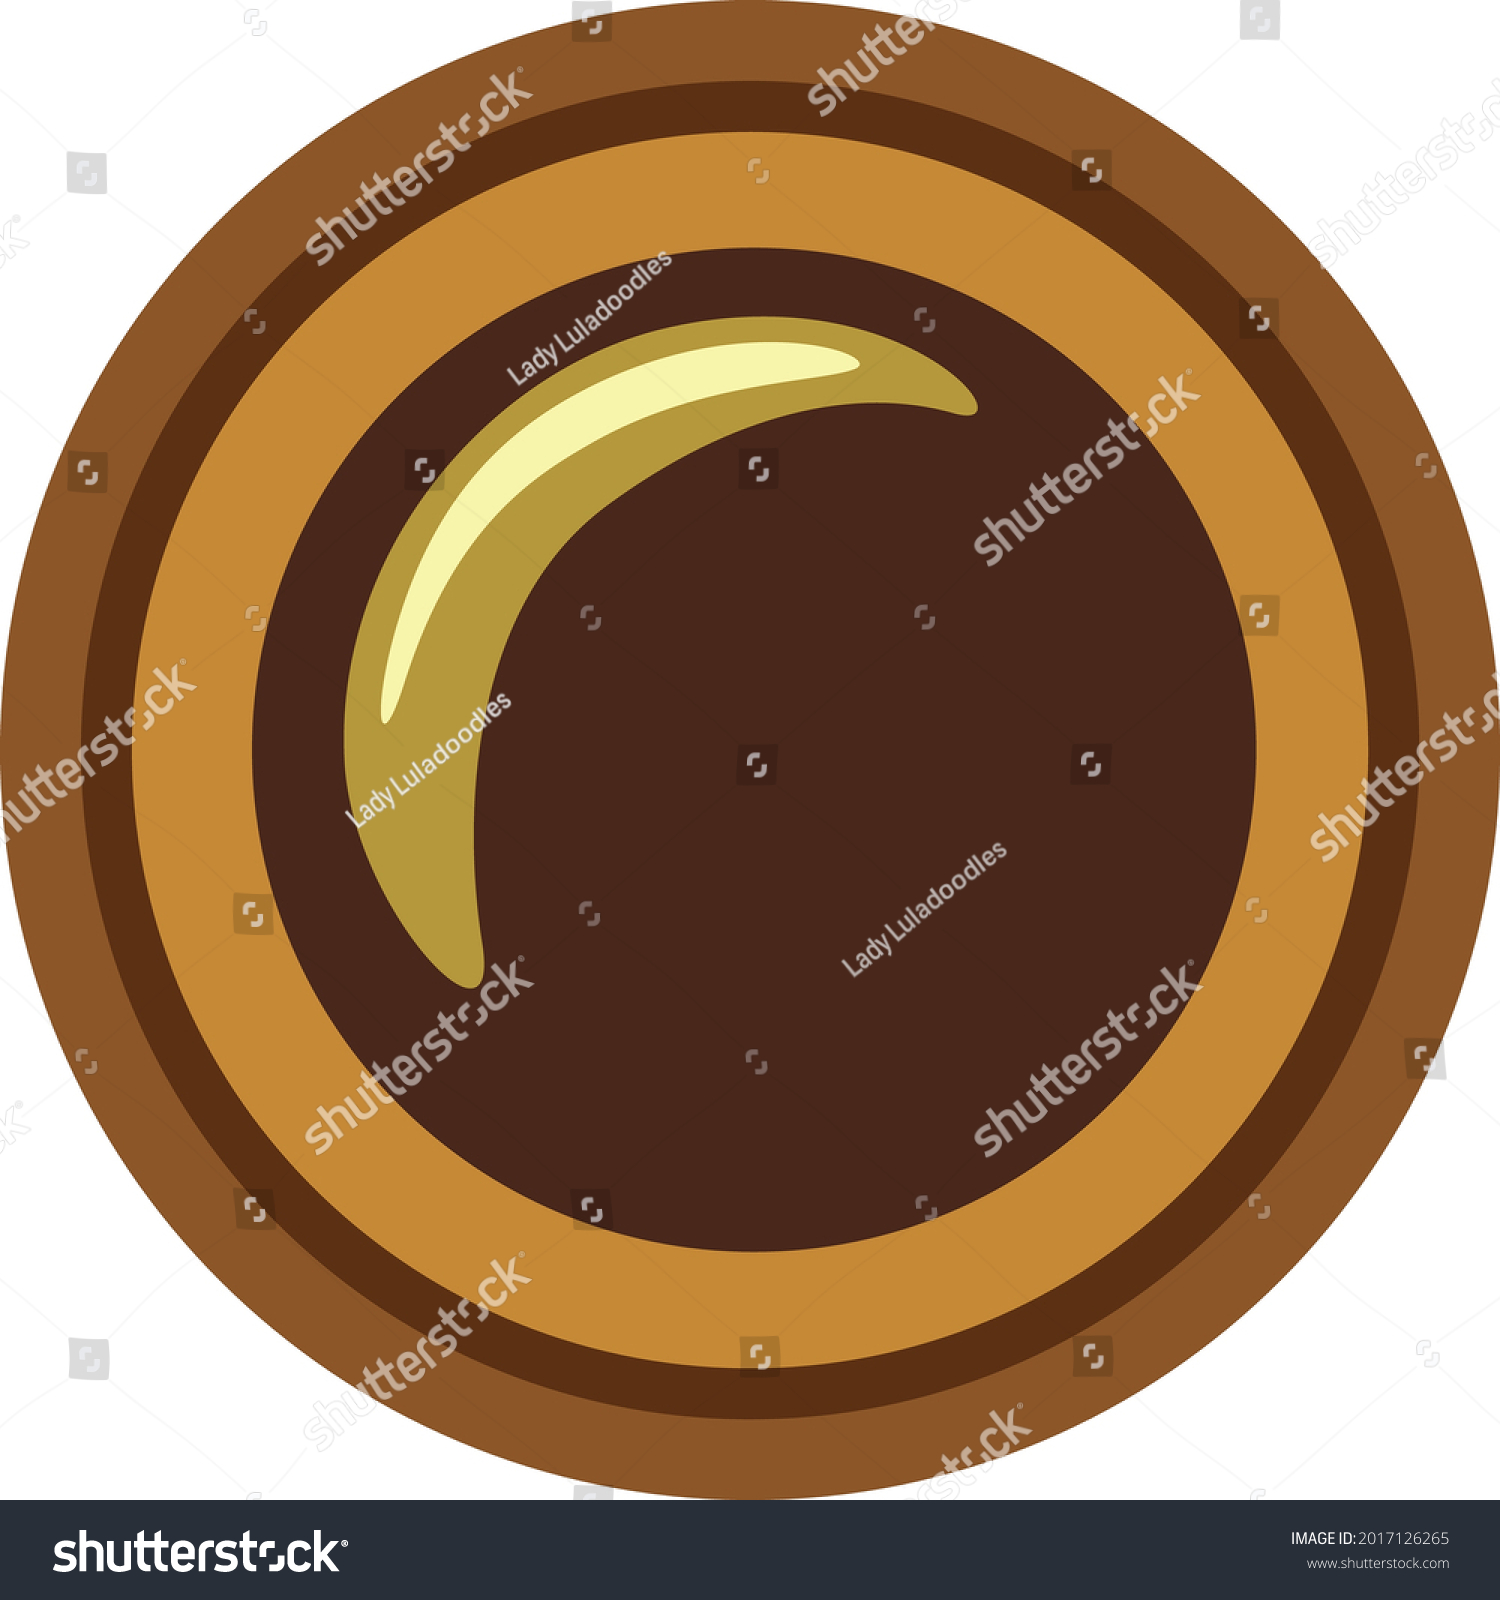 SVG of Circular bullseye style Chocolate candy with brown outer borders, toffee caramel brown centre with dark brown chocolate bean button. Layered confectionary SVG svg